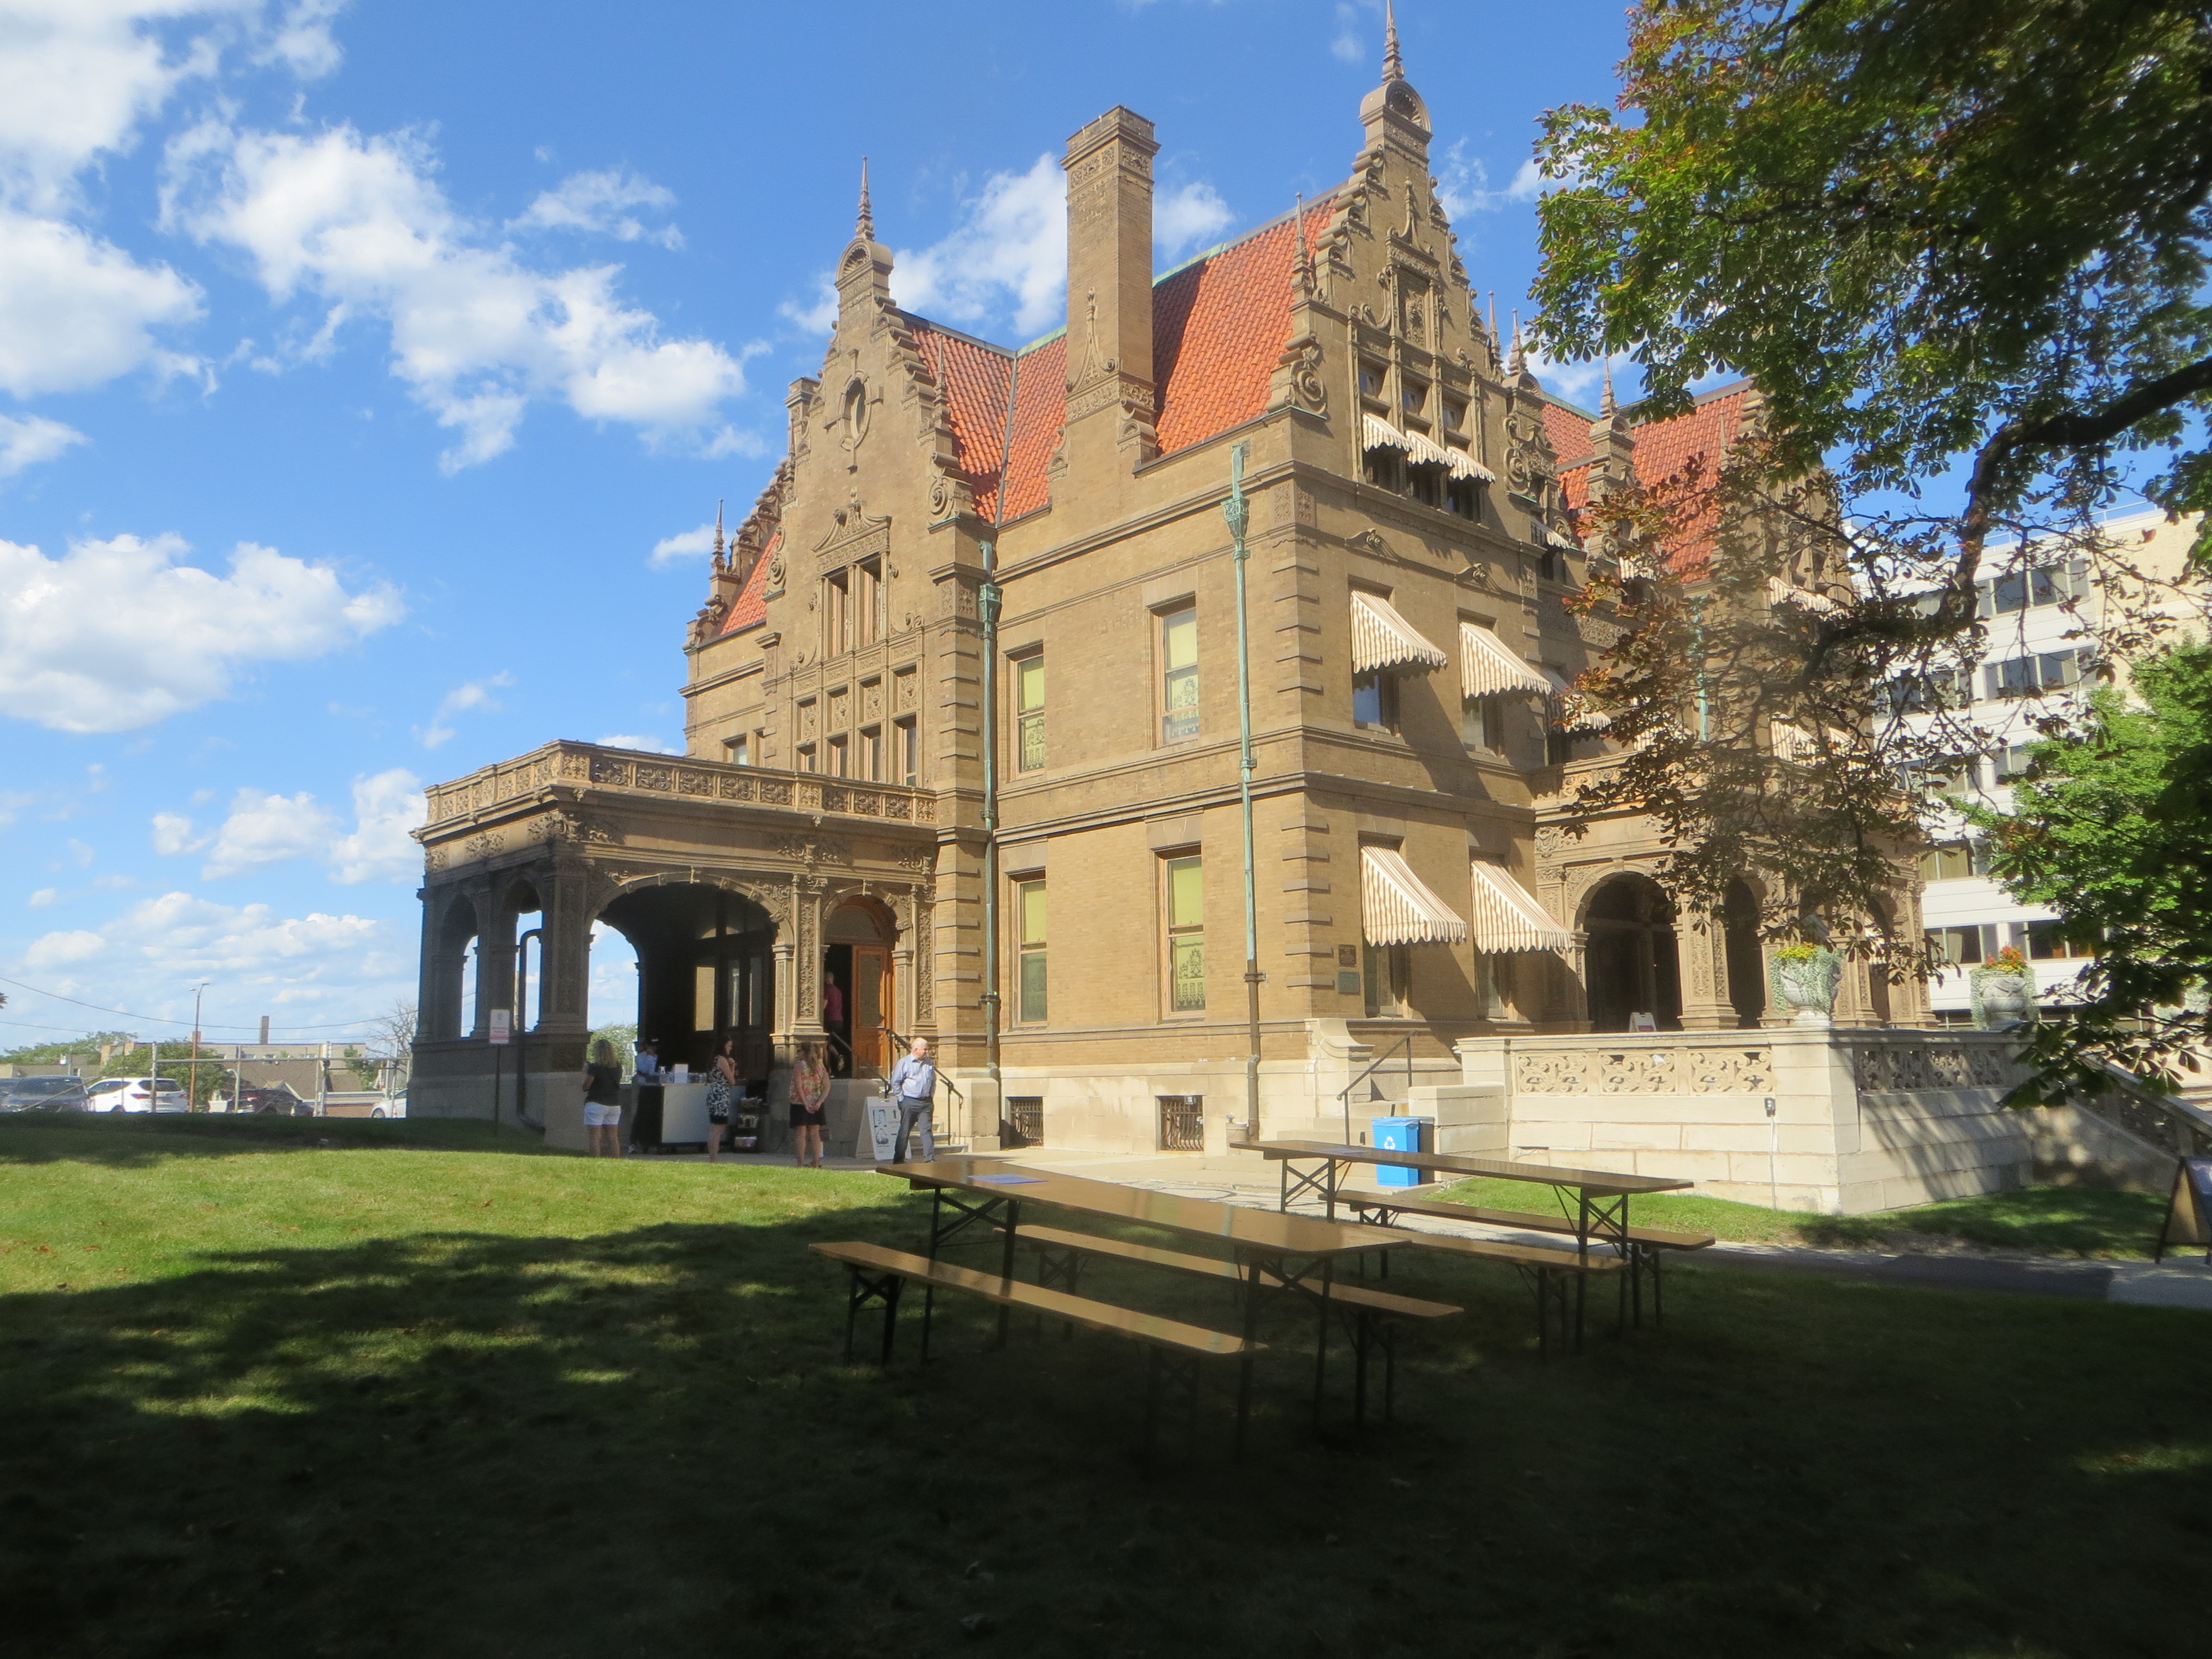 Pabst Mansion Beer Garden. Photo taken August 13, 2021 by Michael Horne.